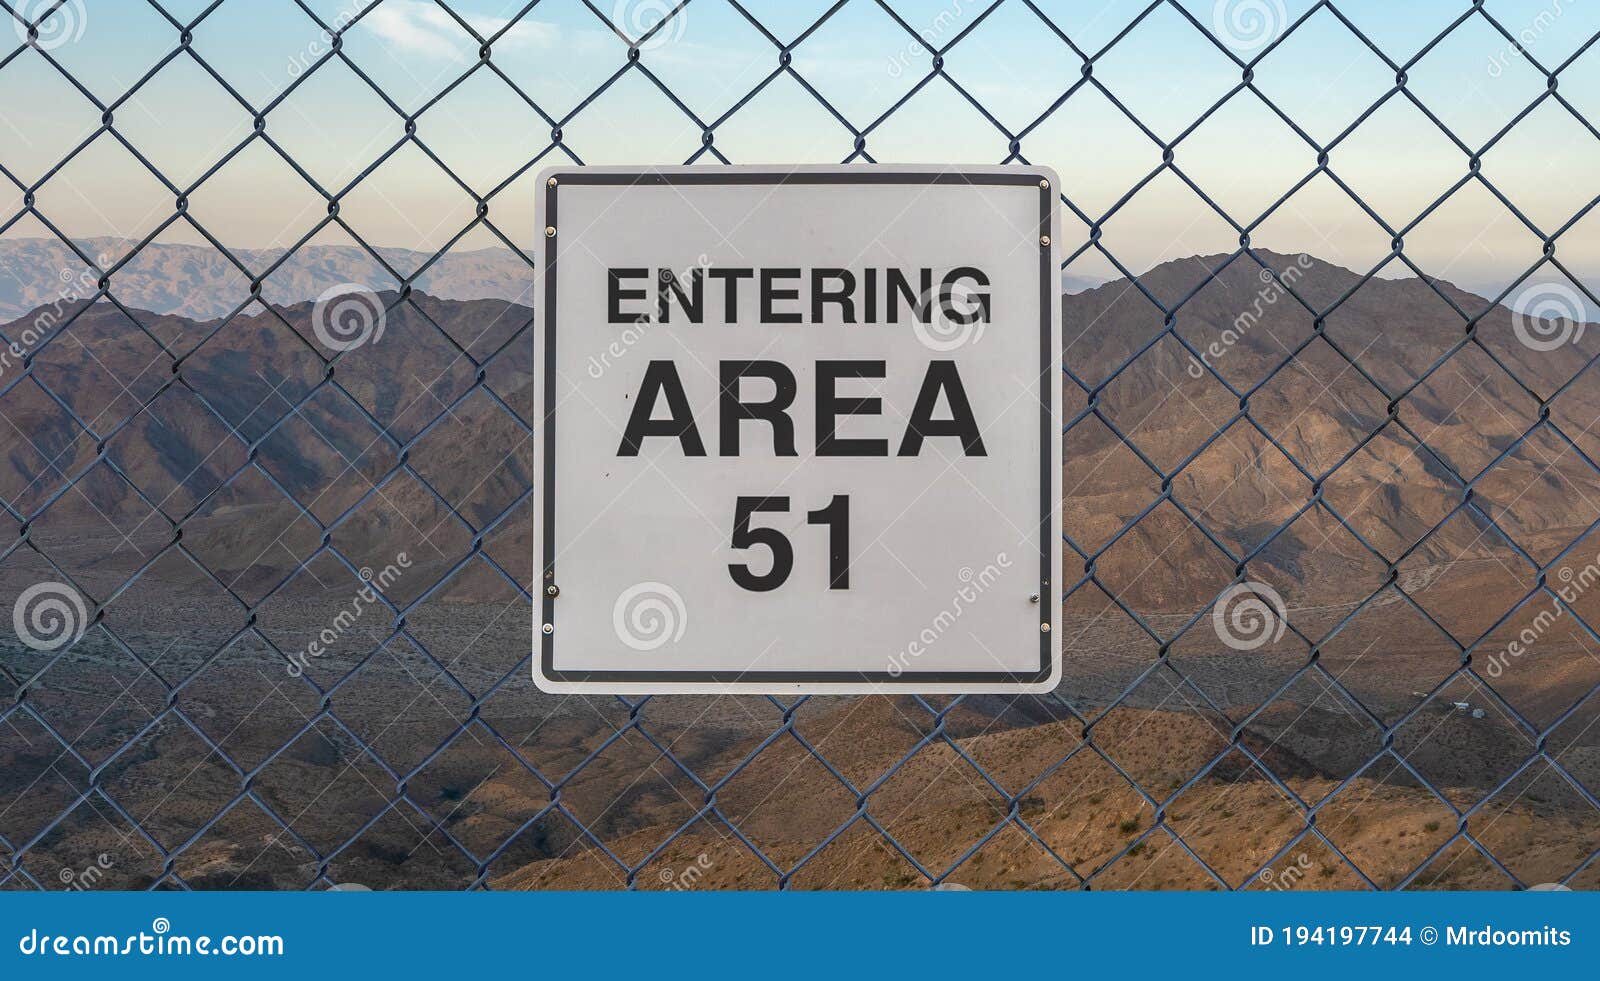 entering area 51 sign